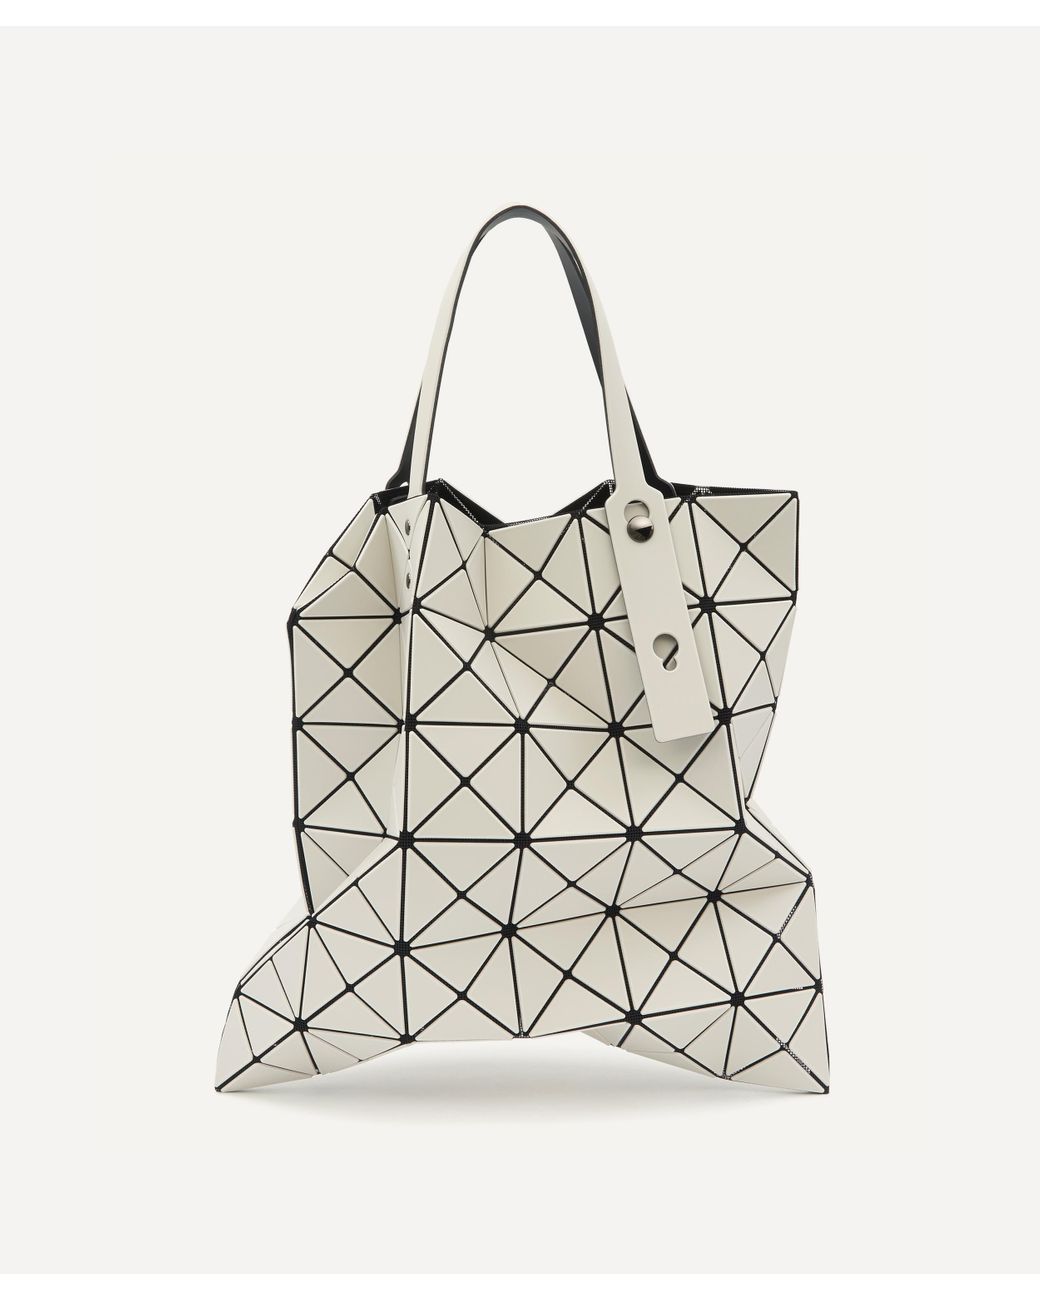 Bao Bao Issey Miyake Lucent Frost Tote Bag in Light Grey (Gray) - Lyst